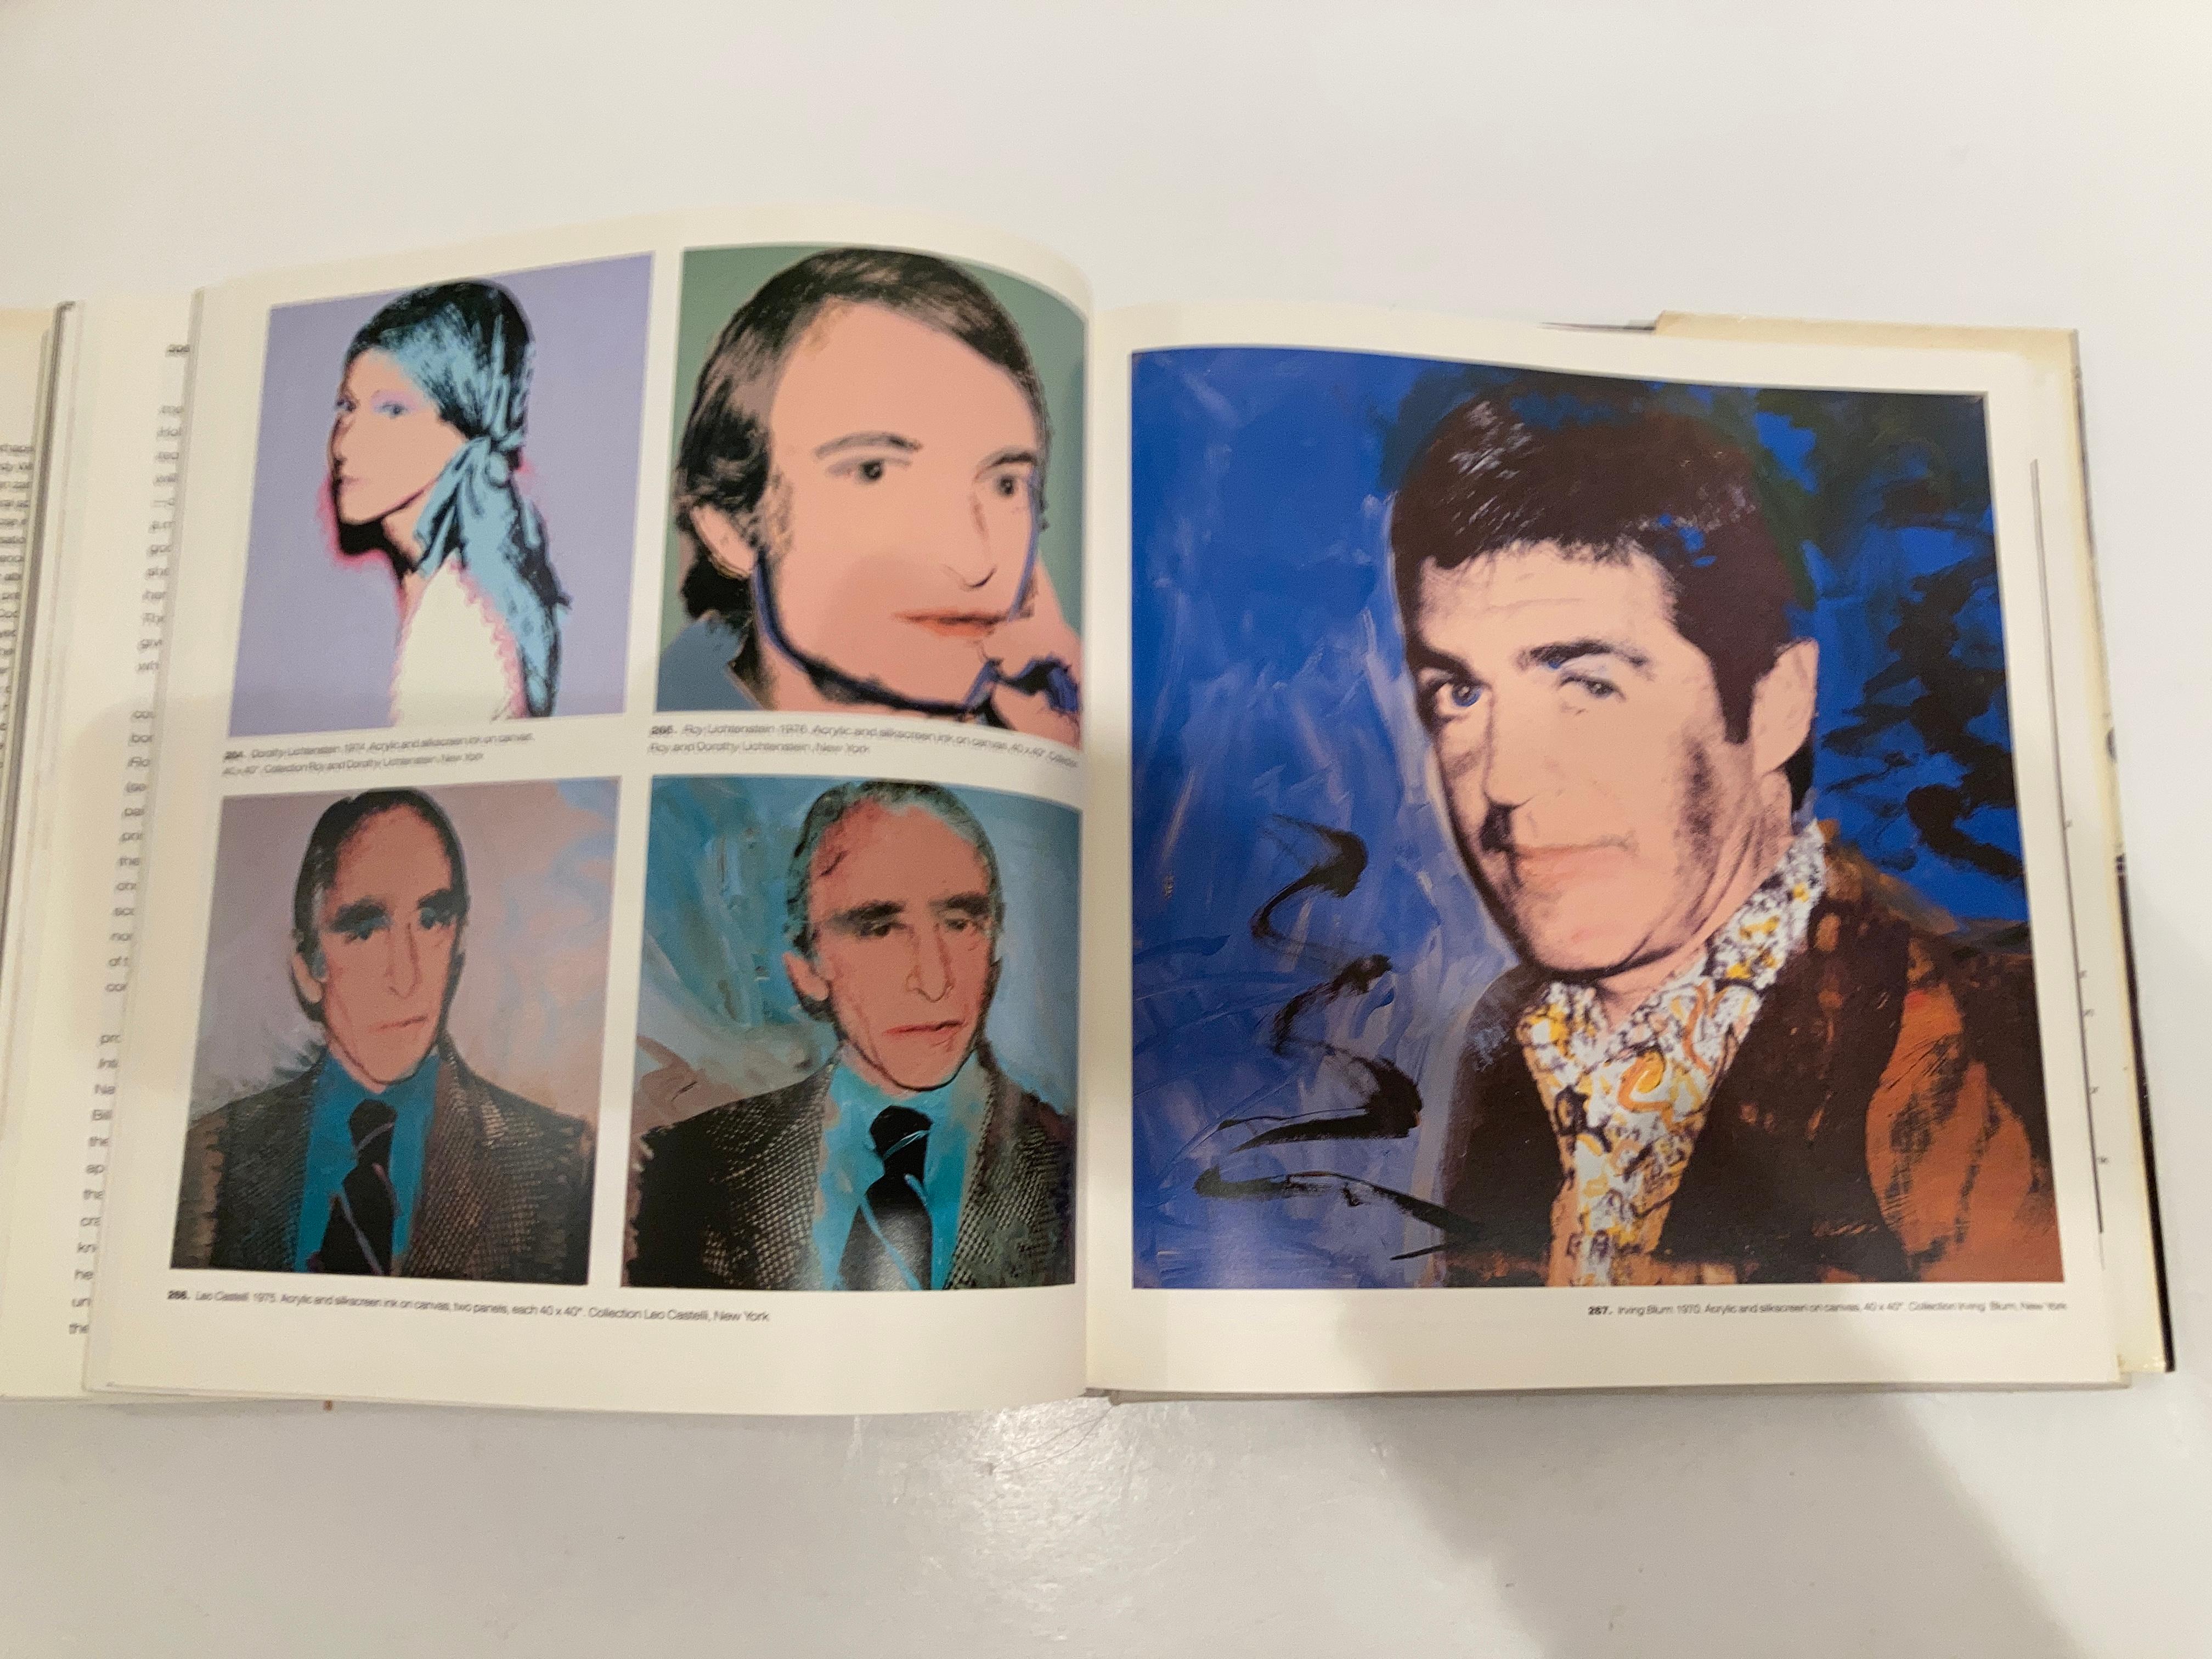 Andy Warhol by David Bourdon Collectible Poster Art Book Vintage, 1989 For Sale 7